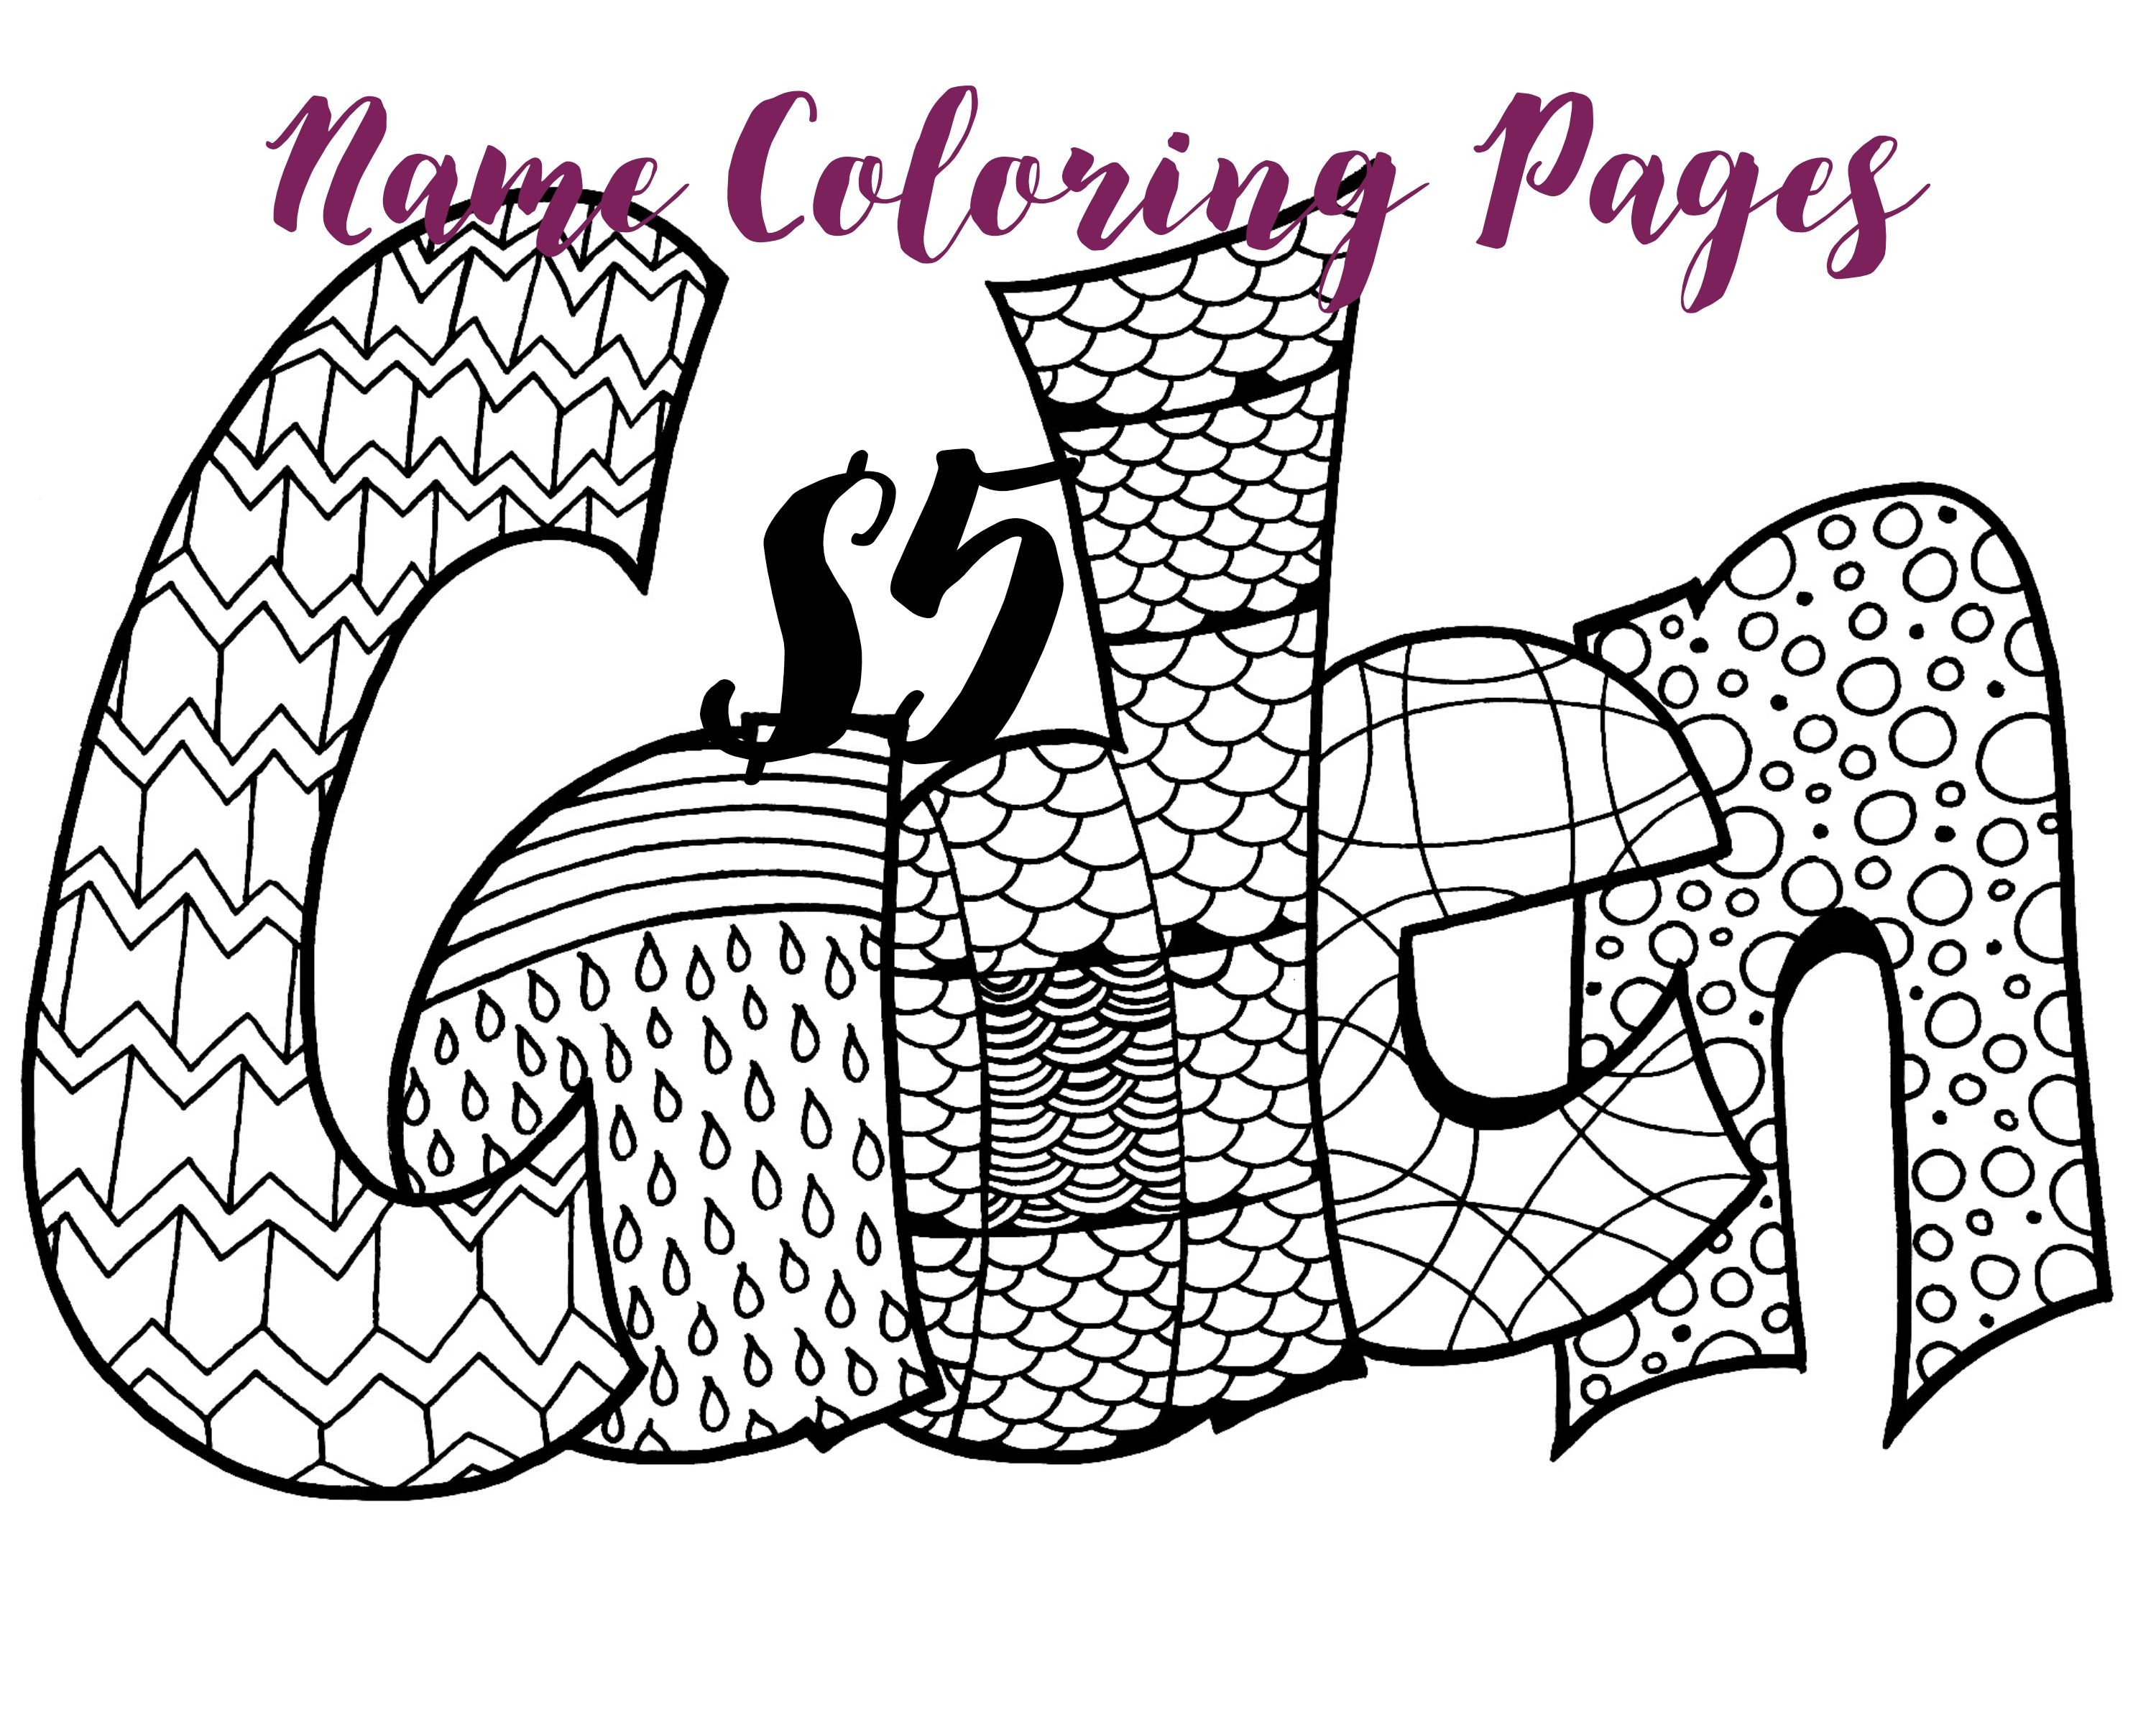 name-coloring-pages-free-download-on-clipartmag